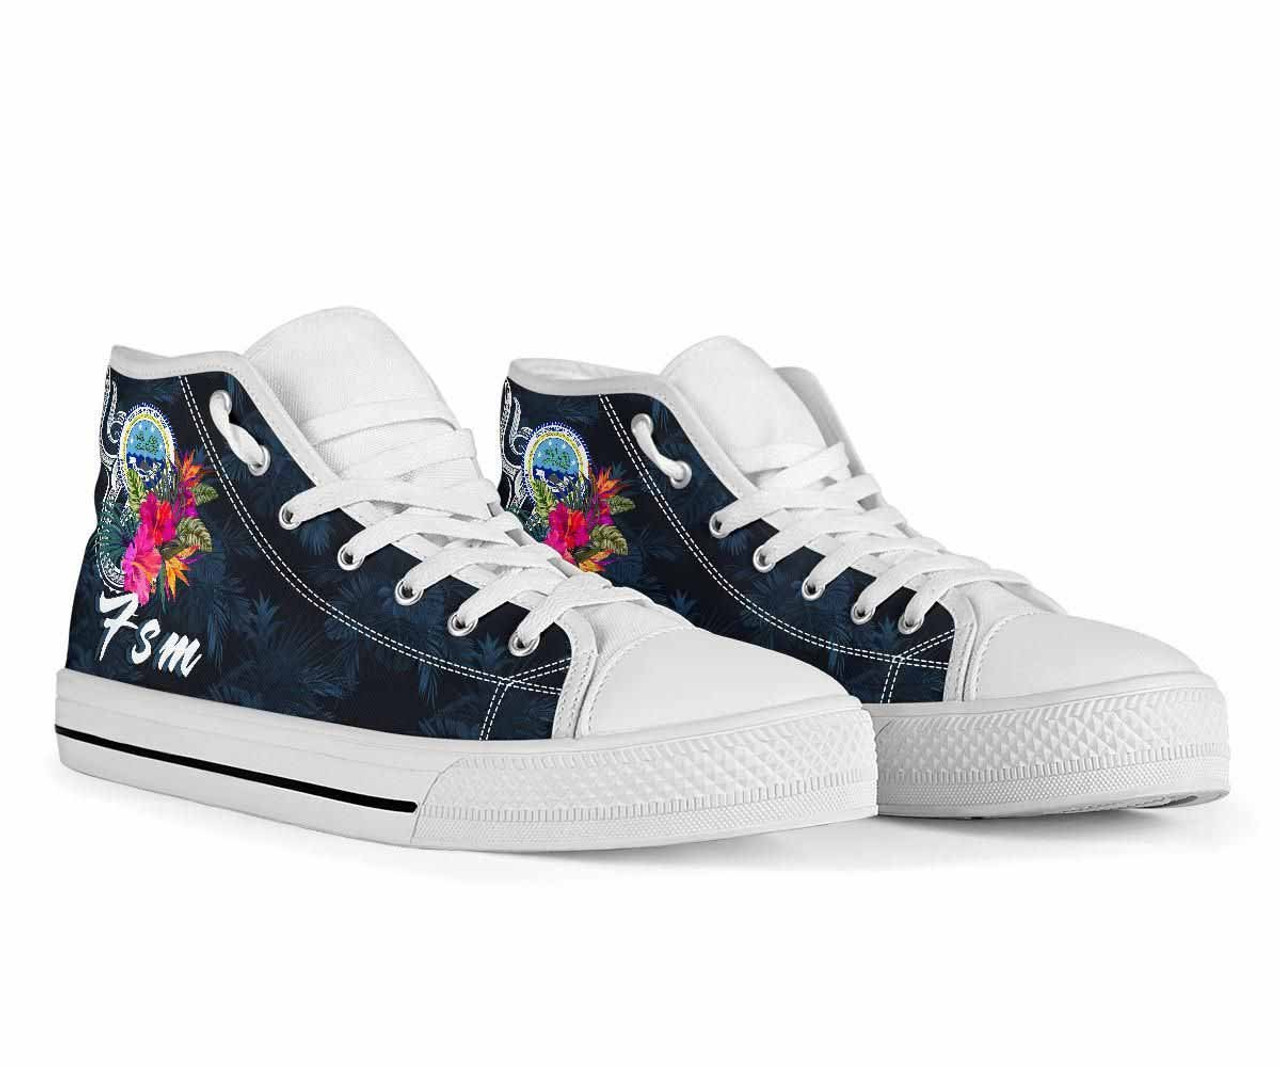 Federated States of Micronesia High Top Shoes - Tropical Flower 7